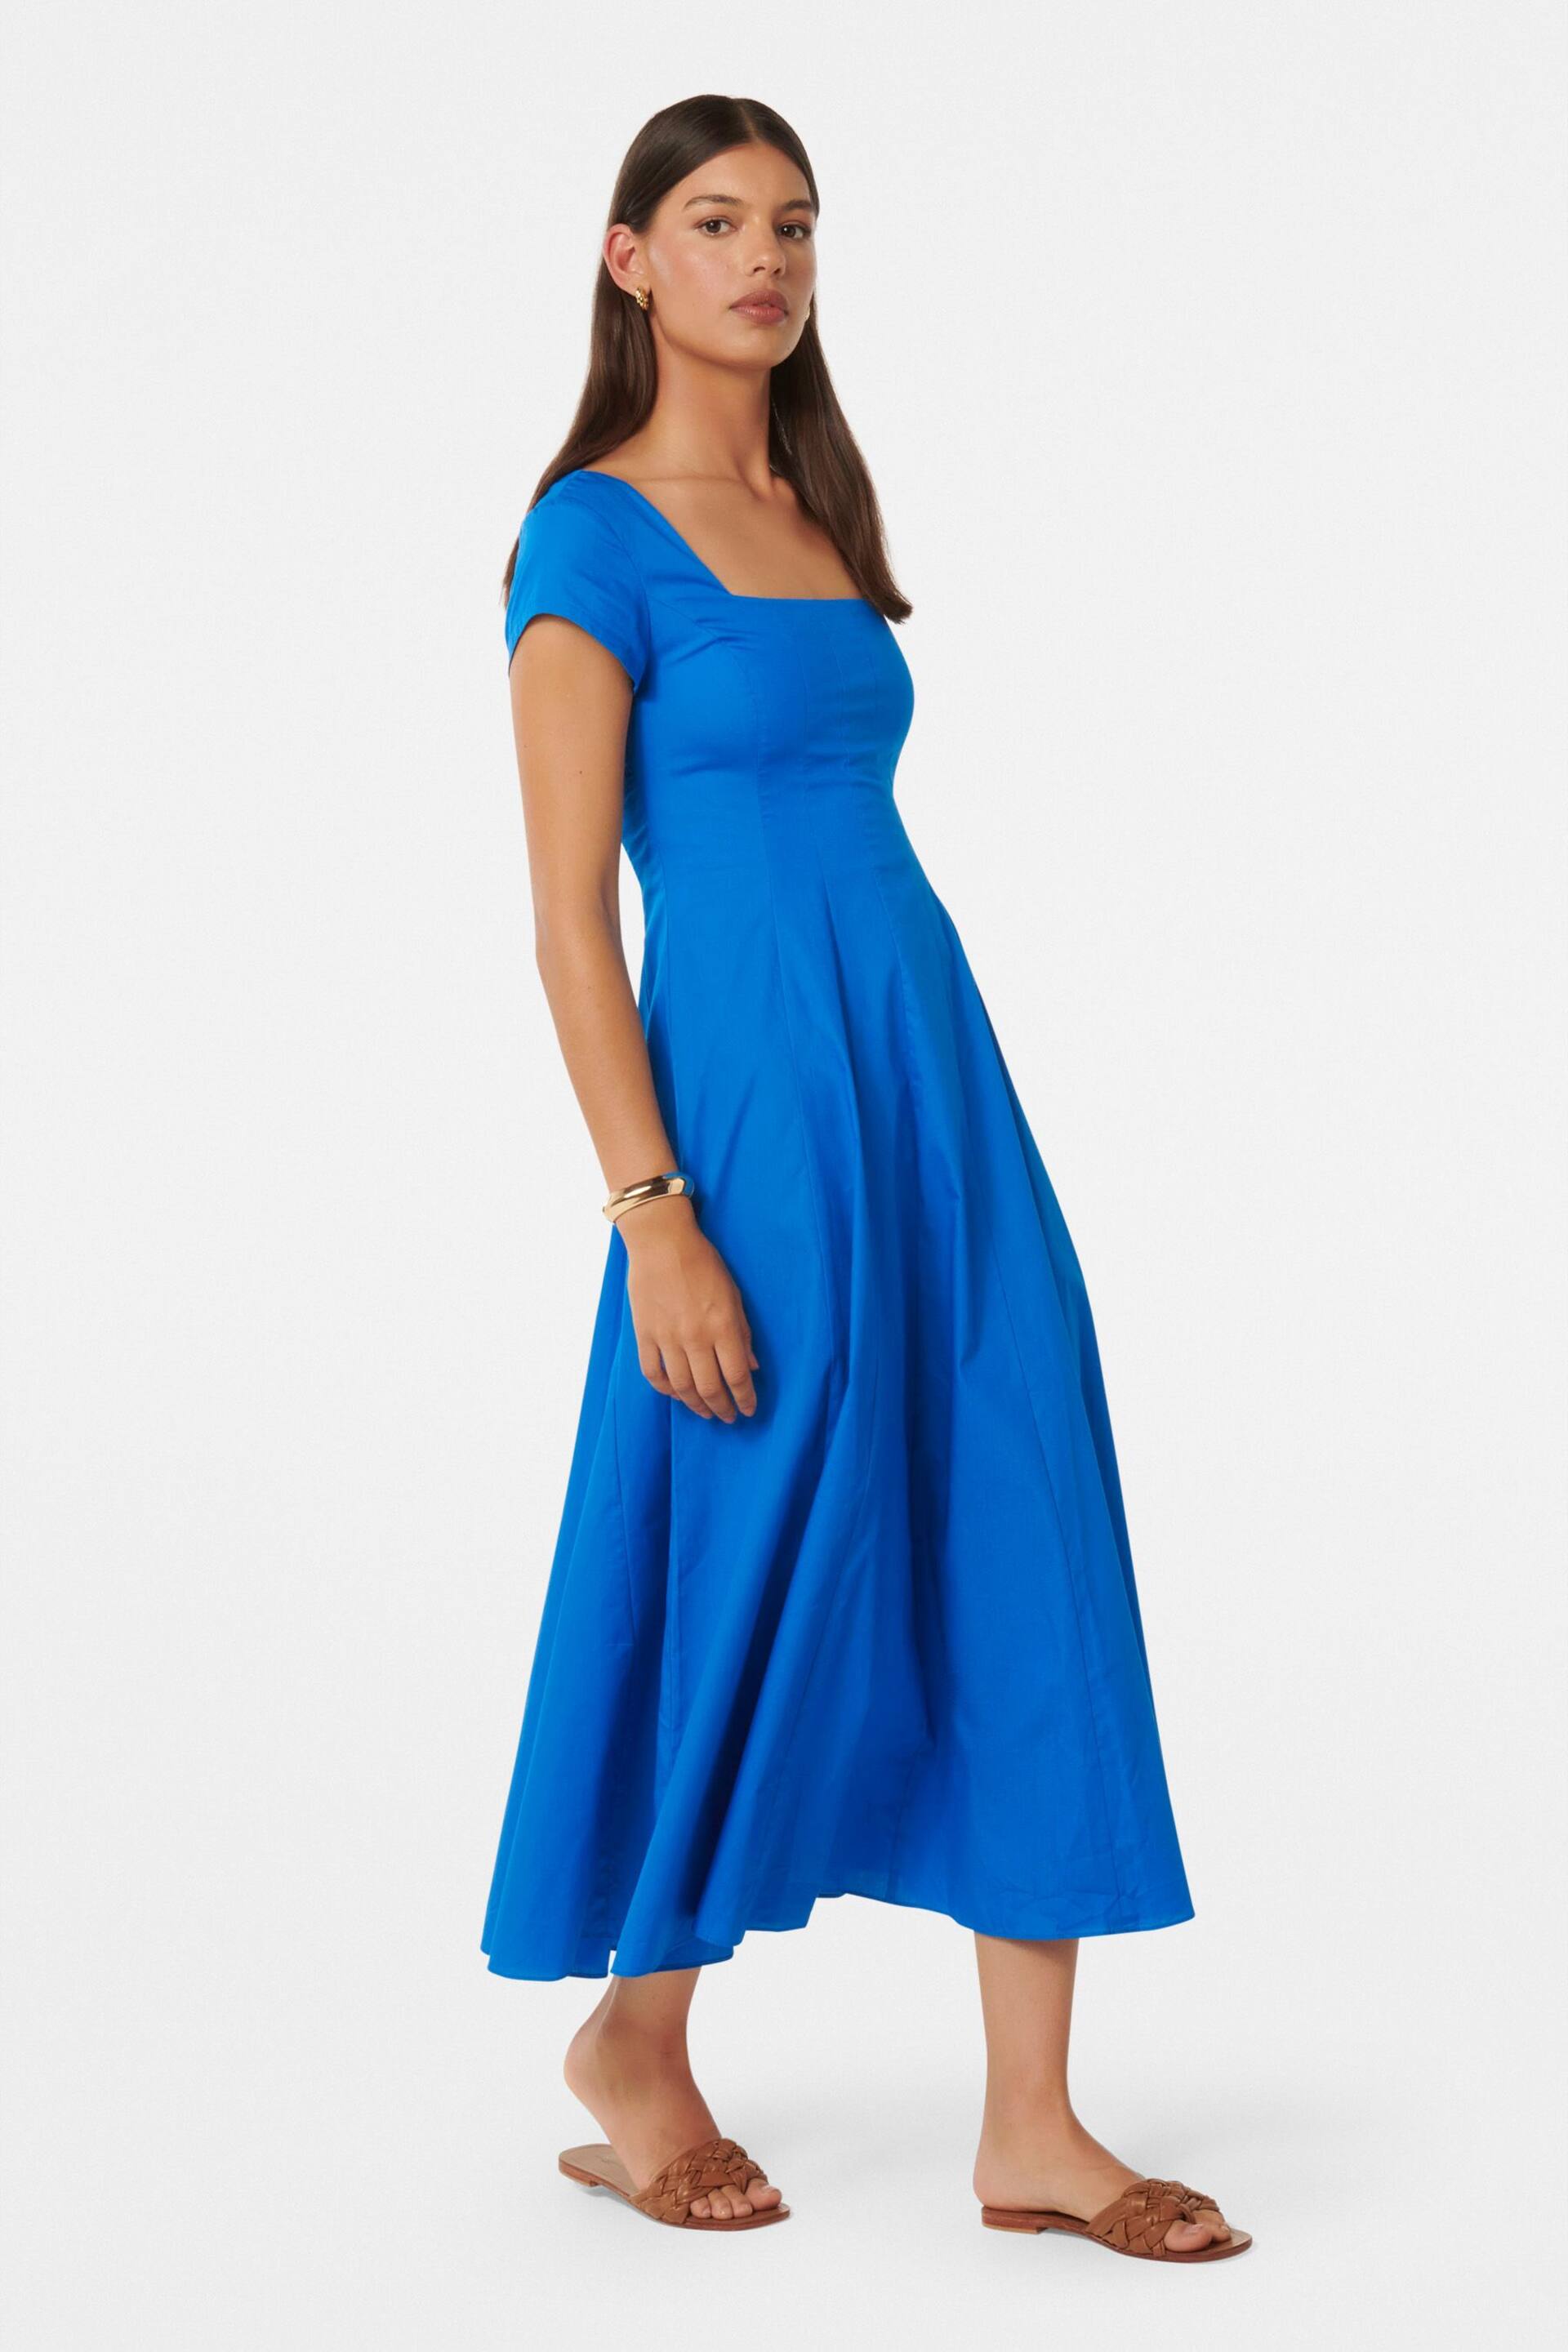 Forever New Blue Raleigh Cap Sleeves Midi Dress - Image 3 of 4